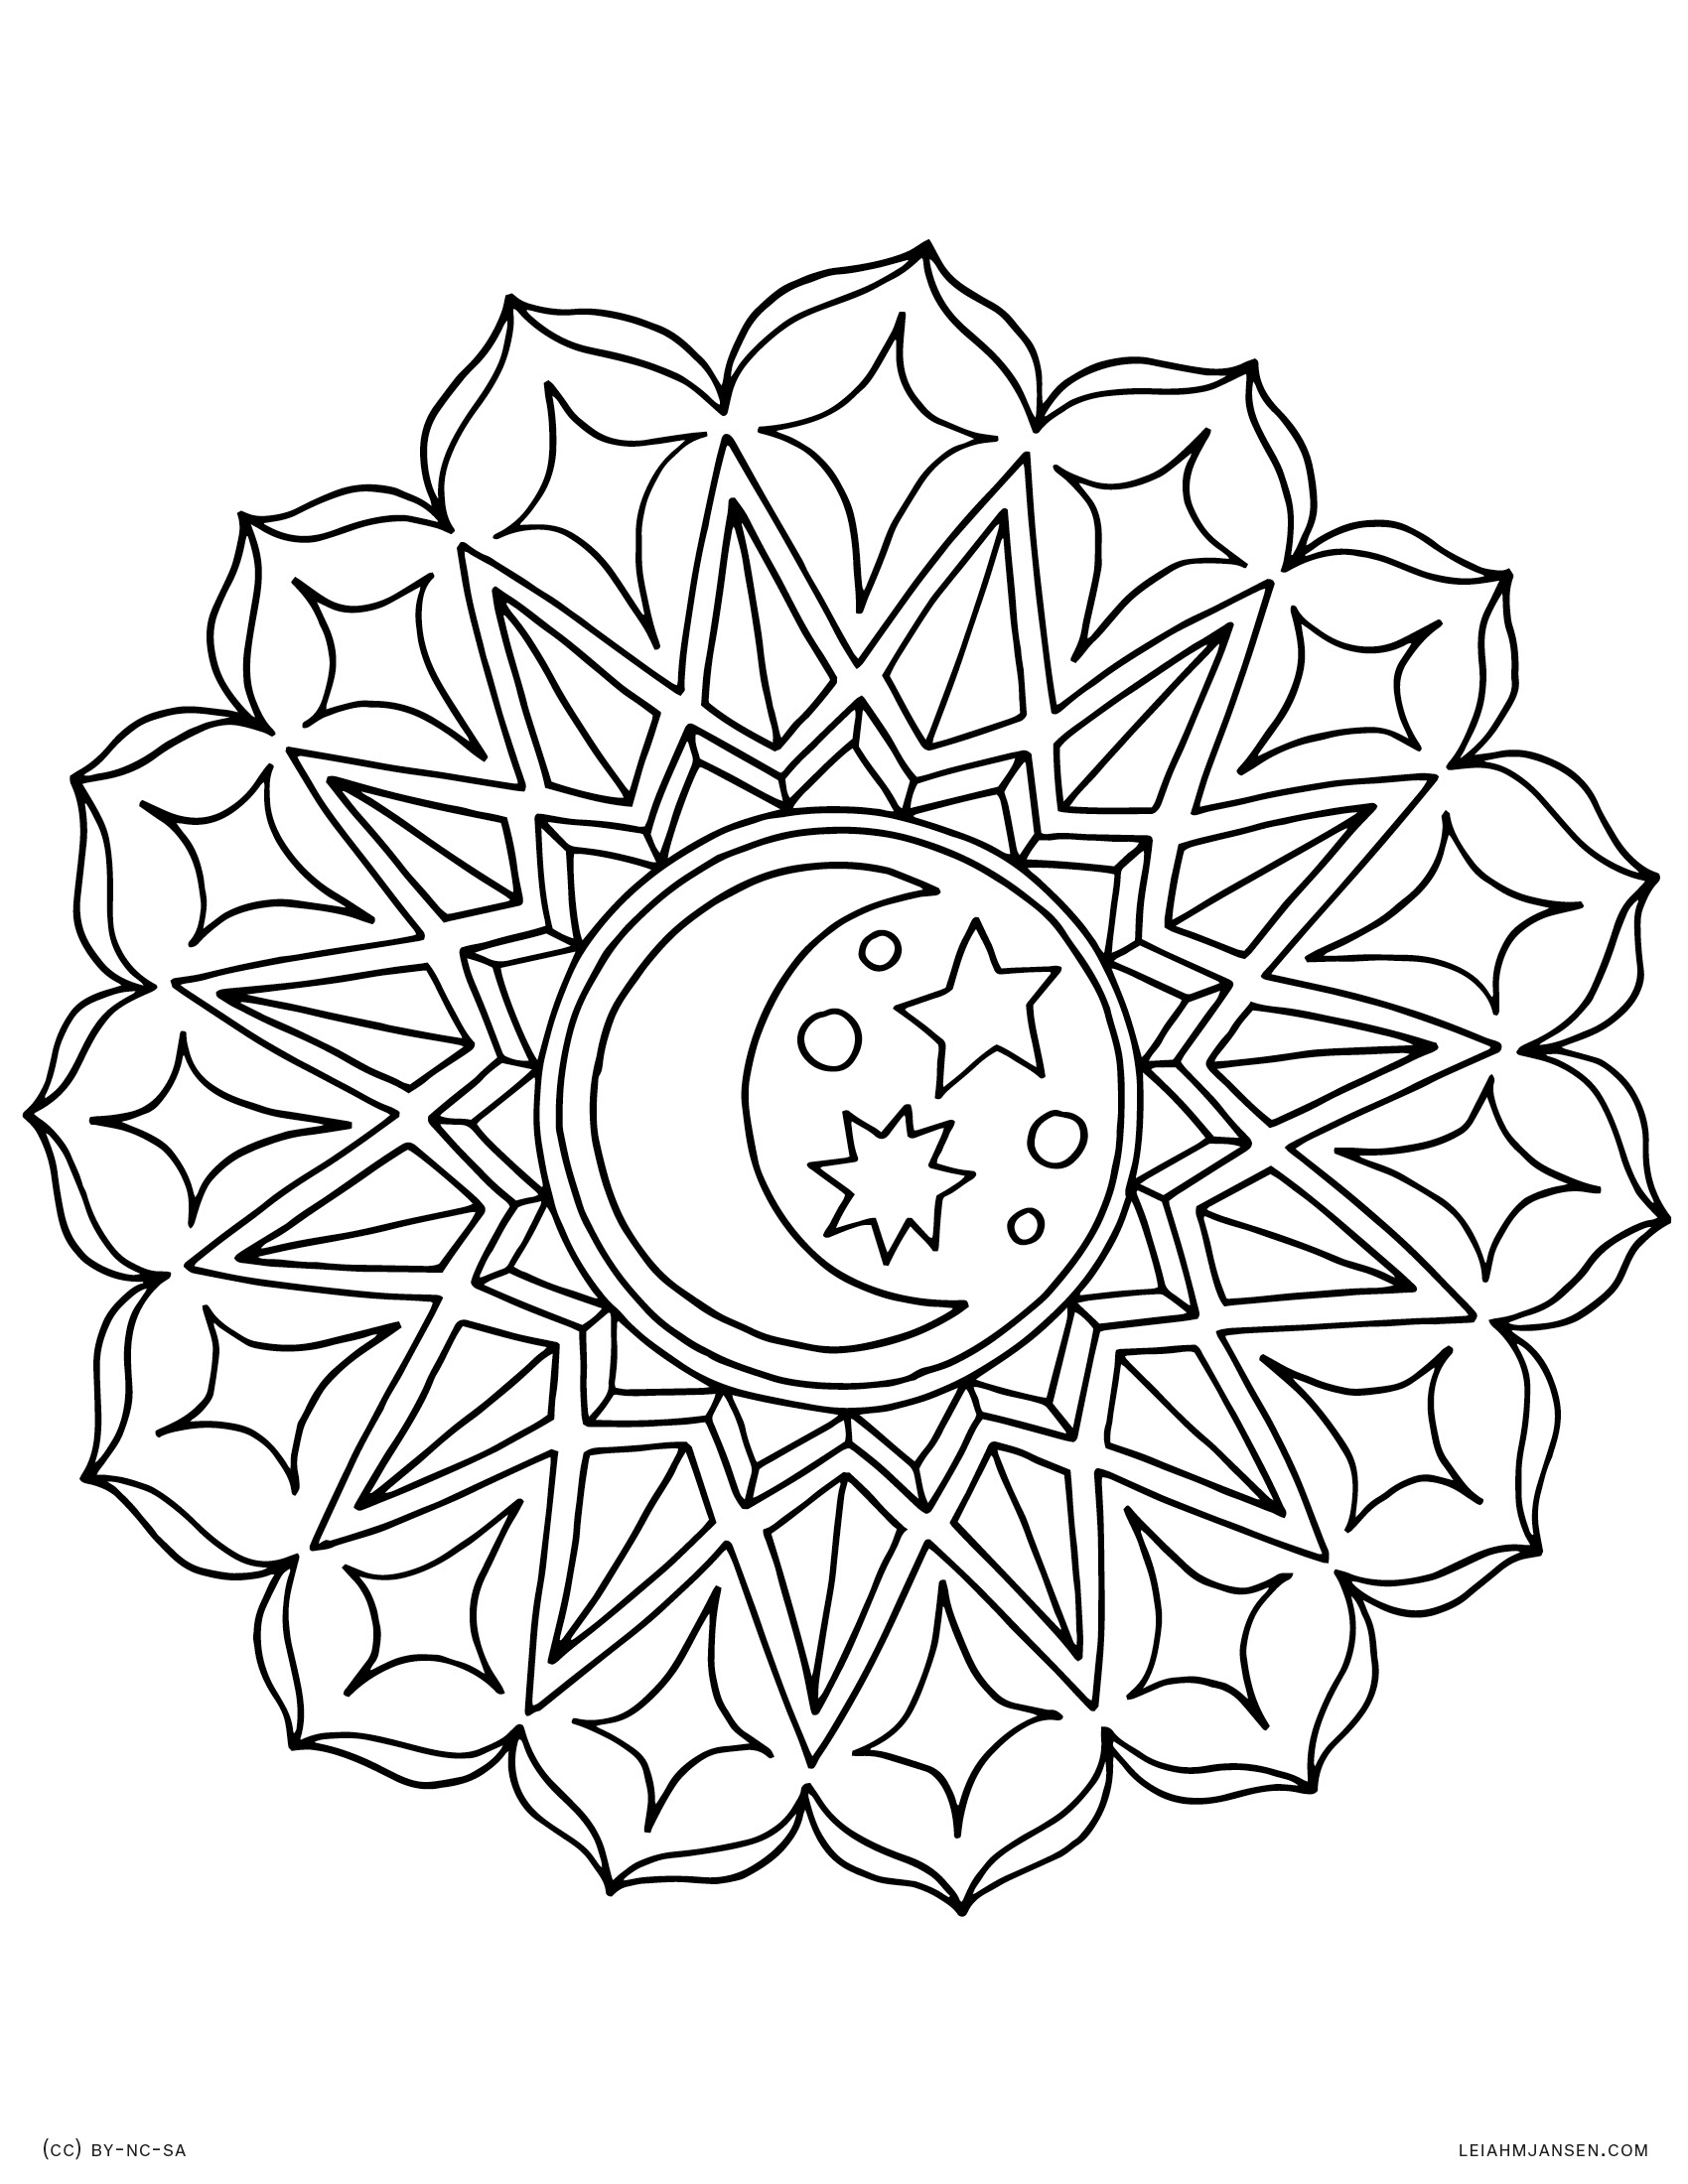 Mandala Coloring Pages For Adults Coloring Pages